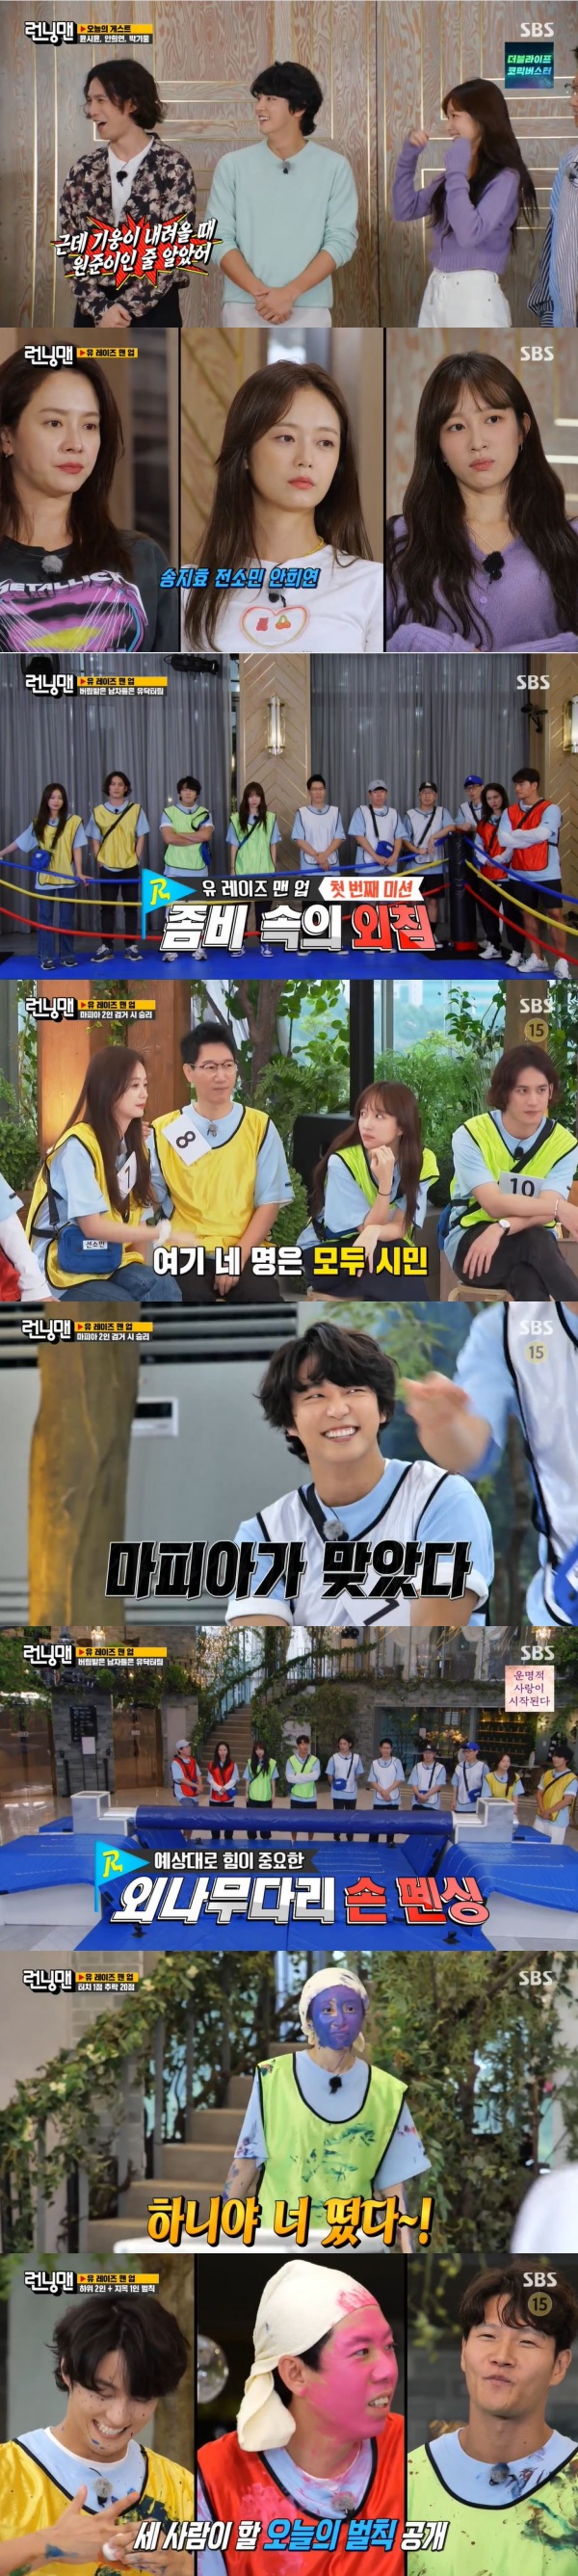 On the SBS entertainment program Running Man, which was broadcast on the 5th, the performances of Yoon Shi-yoon, Ahn Hee-yeon and Park Ki-woong, who were on the race of Yu Rays Man Up, were portrayed.On this day, Yoon Shi-yoon, Ahn Hee-yeon and Park Ki-woong appeared as guests.When Giung came down, I thought Kim One-joon and One-jun were my brothers, said Yoo Jae-Suk, who added, Yang Jun-il resembles him.Park Ki-woong said, I introduced my friend and Mr. Somin in 2005.The members participated in the Yu Rays Man Up Race; Ahn Hee-yeon named Yoon Shi-yoon as Team One.Jeon So-min then named Park Ki-woong and Song Ji-hyo named Kim Jong-kook.Ji Suk-jin, Haha and Yang Se-chan, who did not receive Choices, became the team of Yoo Jae-Suk.The Jeon So-min team hit two problems on the first mission; then Ahn Hee-yeon team Yoon Shi-yoon only hit one problem because of the members interference.On the other hand, Song Ji-hyo and Kim Jong-kook showed perfect breathing and answered the correct answer of 9 questions.Jeon So-min pointed to Yoon Shi-yoon instead of Park Ki-woong during his second mission.Yoo Jae-Suk, who saw this, interfered with the plan of Jeon So-min, saying, I will change Mr. Yoon Shi-yoon and Mr. Ji Suk-jin.So, Jeon So-min asked Yoo Jae-Suk to change except for Ji Suk-jin brother and laughed.The members started their second mission two, the Mafia Game; Ahn Hee-yeon, Park Ki-woong, Jeon So-min and Ji Suk-jin, were identified as citizens.Members arrested Mafia Yoon Shi-yoon after fierce Murder, She WroteThe remaining mafia shot Yoo Jae-Suk; Kim Jong-kook suspected Yang Se-chan as a mafia.I will save you once, he said. If you save me, who will you kill? Yang Se-chan said, I am you.Kim Jong-kooks Murder, She Wrote, Yang Se-chan was a mafia.Song Ji-hyo and Kim Jong-kook teams remained at No. 1 while Yoon Shi-yoon and Yang Se-chan finished bottom.Yoon Shi-yoon said, I am going to get the last one if I do not do it a little more, and I will bring down my brother. Today I will make my brother third place. I pledged revenge for Kim Jong-kook, who played in the mafia game.Members went on a relay quiz mission; Jeon So-min and Yang Se-chan appeared to struggle.Yoo Jae-Suk, who ranked first in the middle rankings, said, Jeon So-min and Yang Se-chan team will give priority.The Yoo Jae-Suk team finished first; followed by Ahn Hee-yeon, Jeon So-min and Song Ji-hyo.Yoo Jae-Suk, who scored 220 points, handed out only 30 points to the team One, causing the anger of the team One.Ahn Hee-yeon and Jeon So-min also secured their own points and Choices safety.The members played the final mission, Outside Hand Fencing. Ahn Hee-yeon was humiliated by Hahas attack.Yoo Jae-Suk, who saw this, comforted him, Youre out of the way.Park Ki-woong was embarrassed by the confrontation with Kim Jong-kook, saying, I think I lost my memory for about two seconds.Park Ki-woong led the teams victory over Yoo Jae-Suk by Choices for a companion self-destruct with Kim Jong-kook.The bottom two, Yoon Shi-yoon and Yang Se-chan, identified Kim Jong-kook as the target of penalties.Kim Jong-kook was delighted to hear that 100 squat penalties were made, so members protested, What penalties is this?Kim Jong-kook said, We should make it ours, not these 100 penalties.Meanwhile, Running Man is an entertainment program that Korean stars perform Game and missions together and give laughter. It broadcasts every Sunday at 5 pm.Photo SBS broadcast screen capture